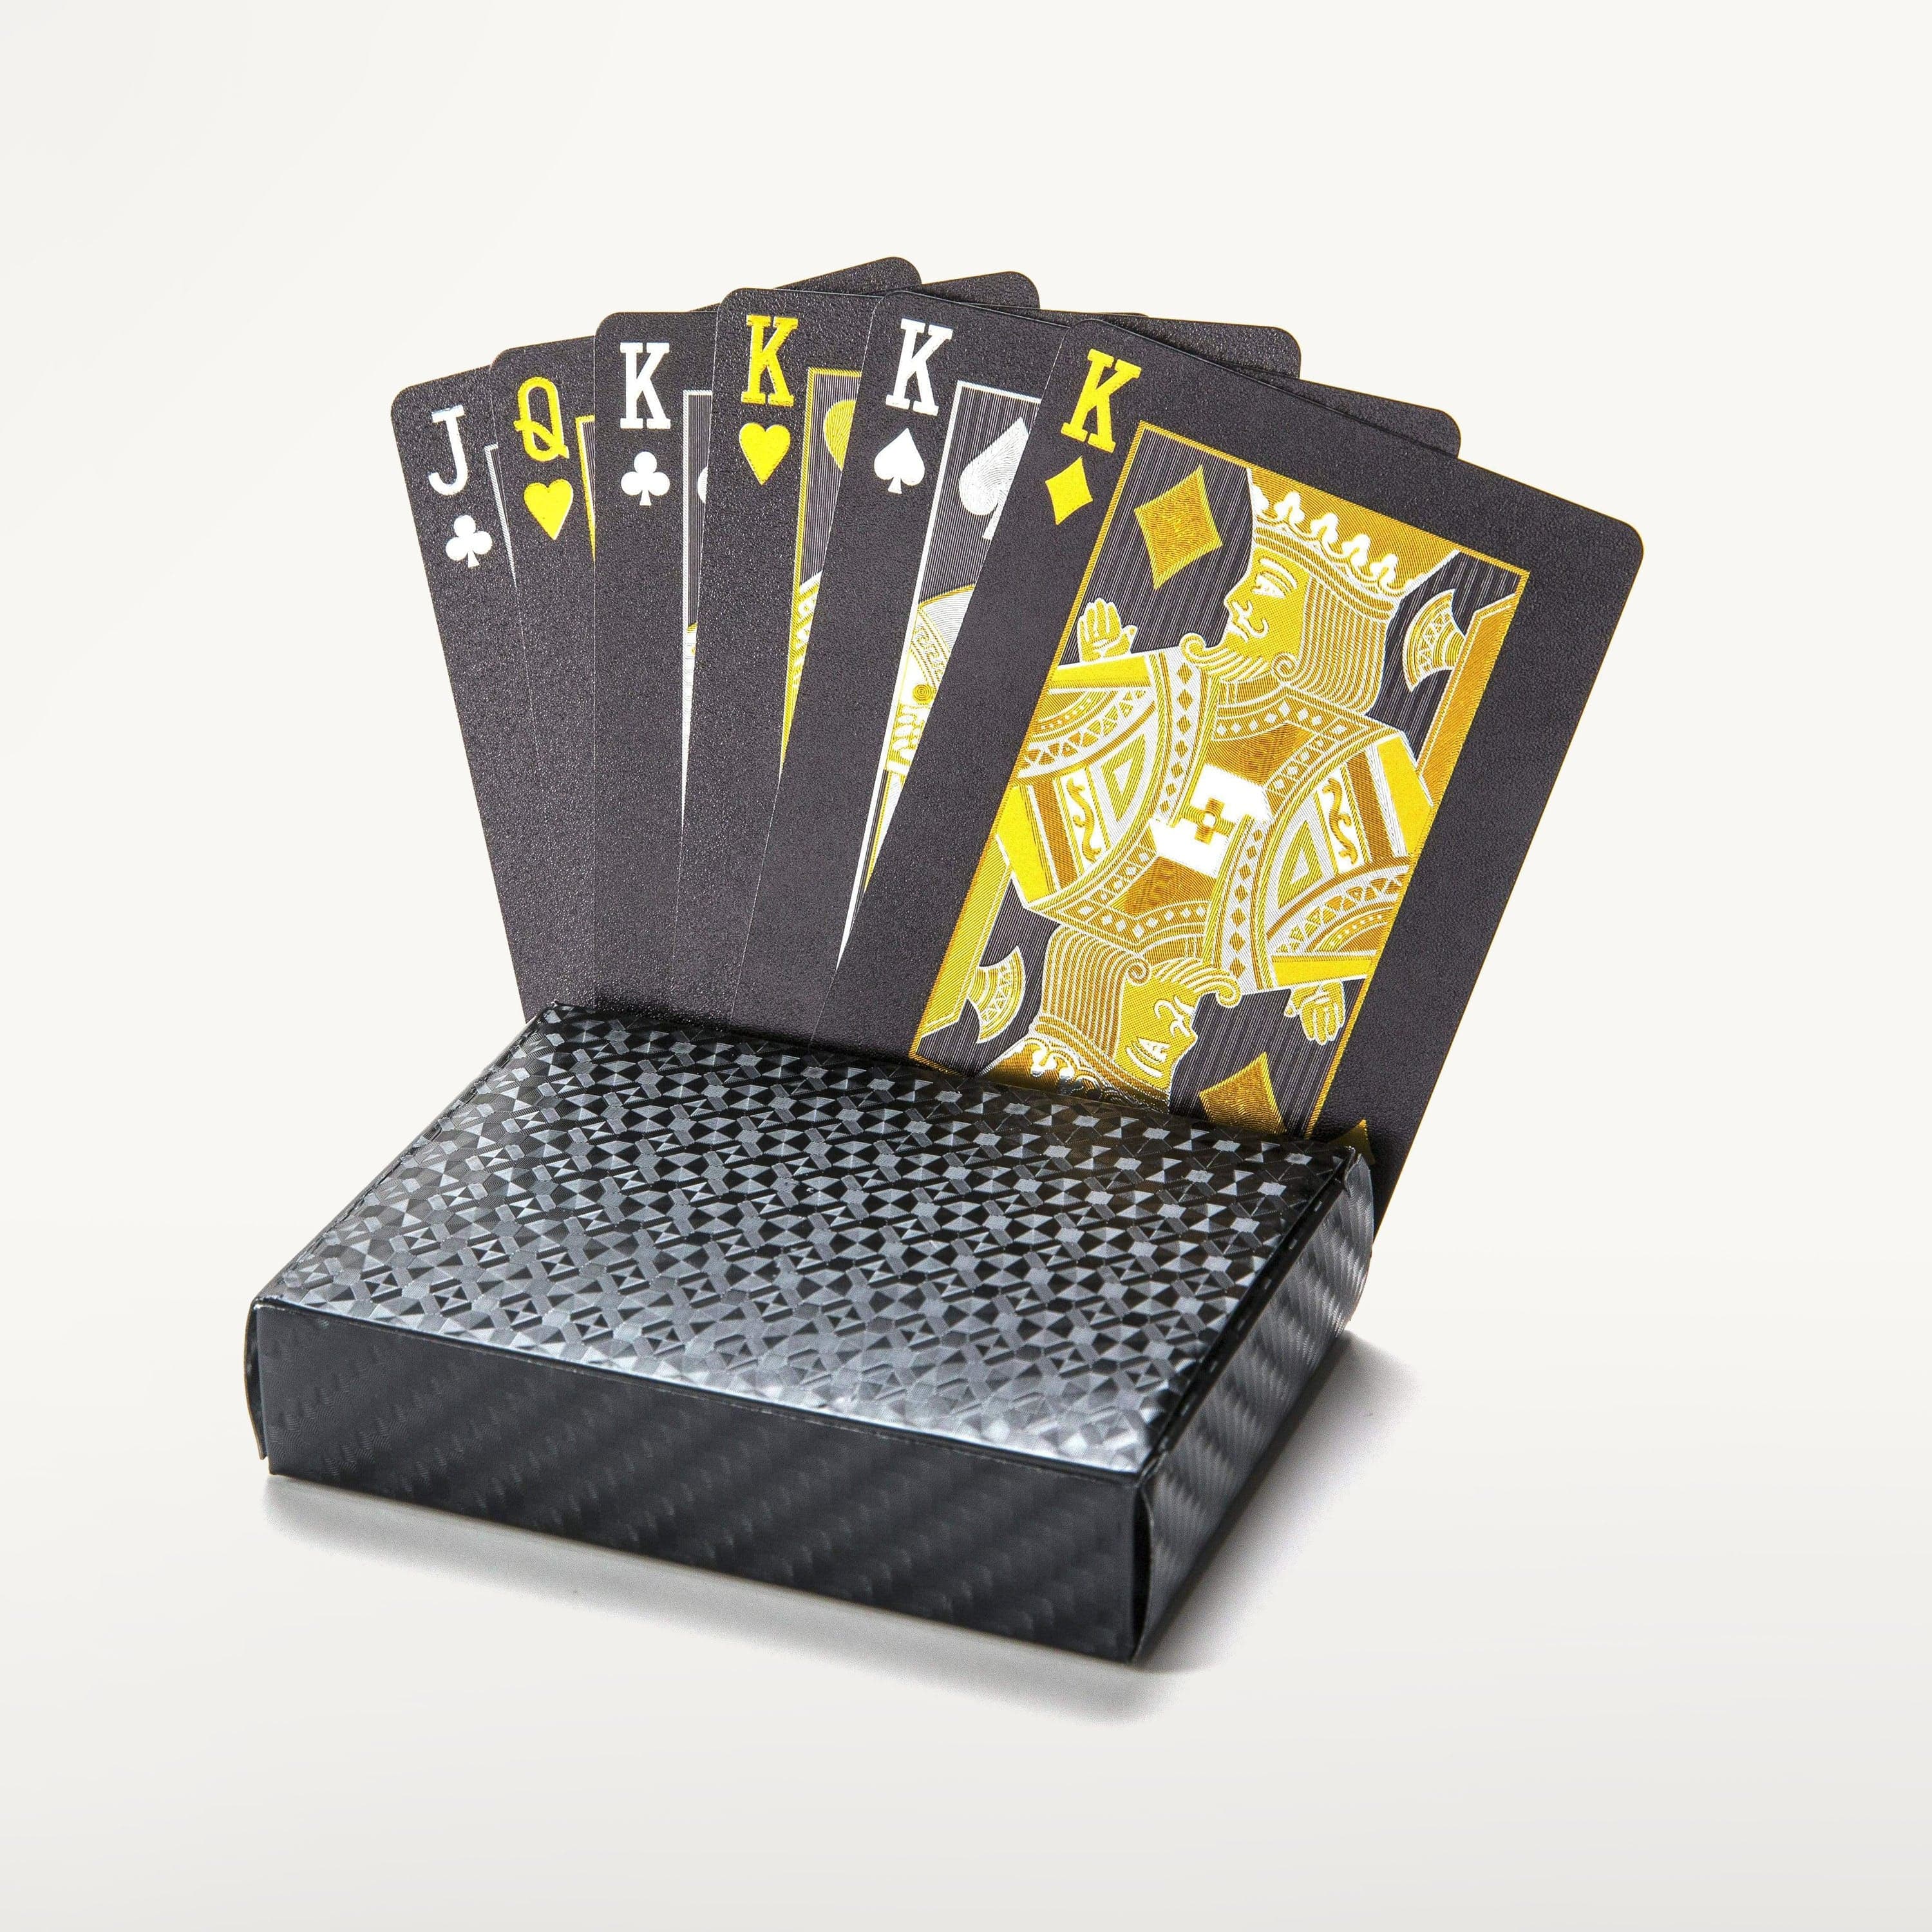 Welcome to Fabulous Las Vegas Black Foil Playing Cards Gold